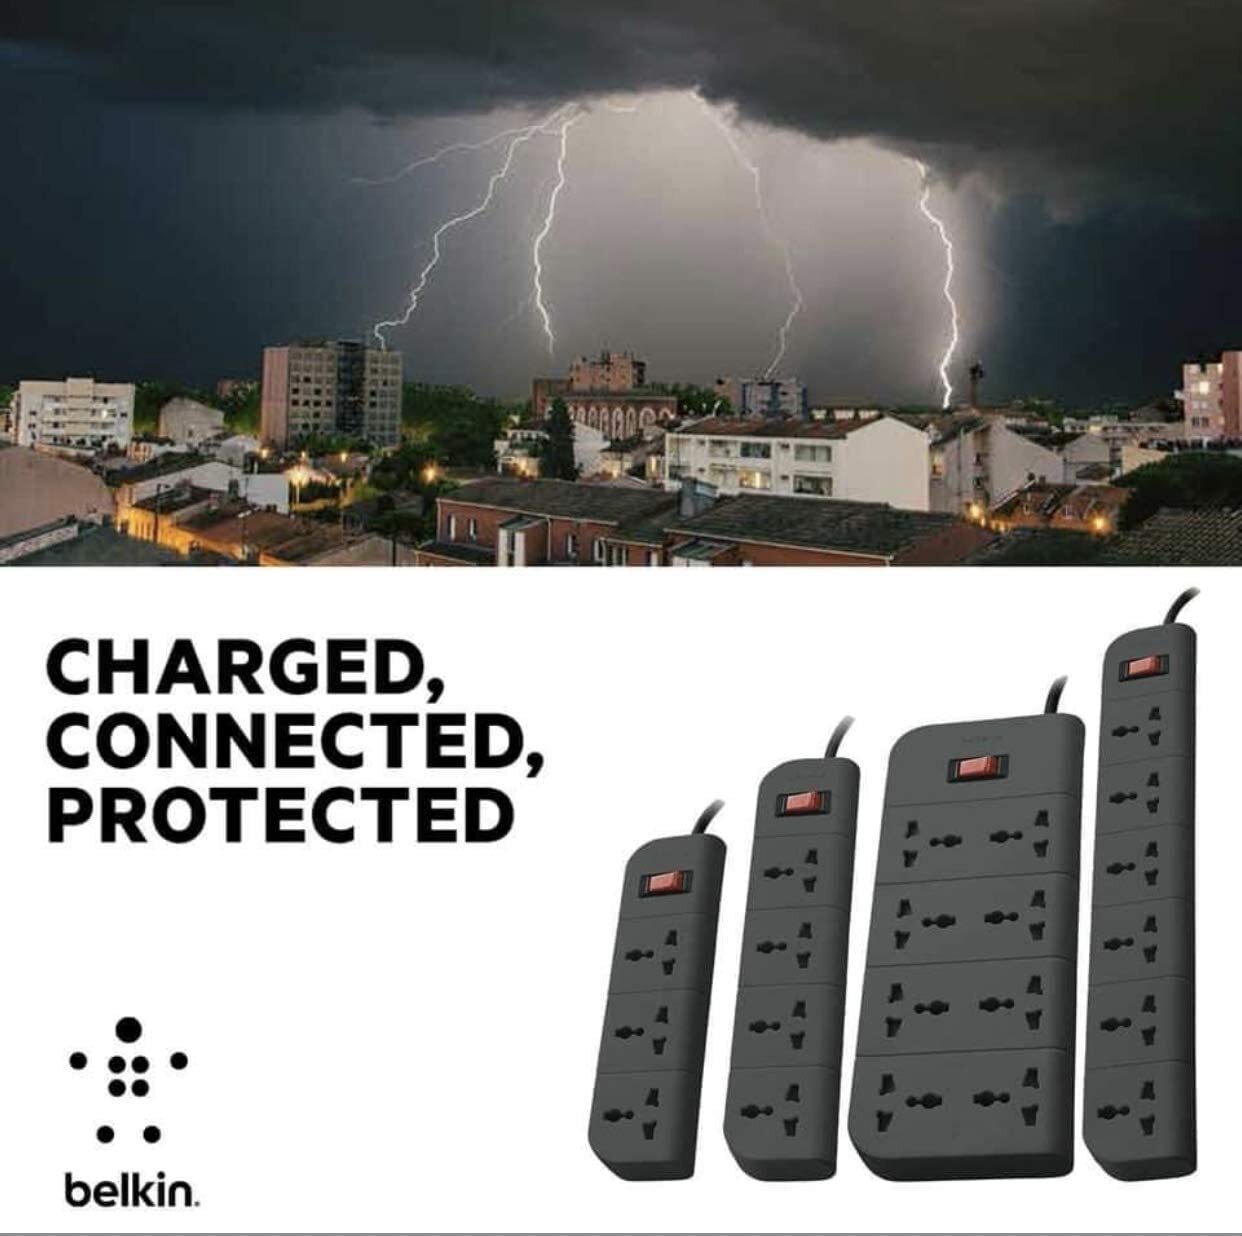 Belkin 6-Socket Surge Protector Universal Socket with 6.5ft (2-Meter) Heavy Duty Cable Overload Protection, Extension Cord Comes with 5 Years Manufacturer Warranty, Grey Color